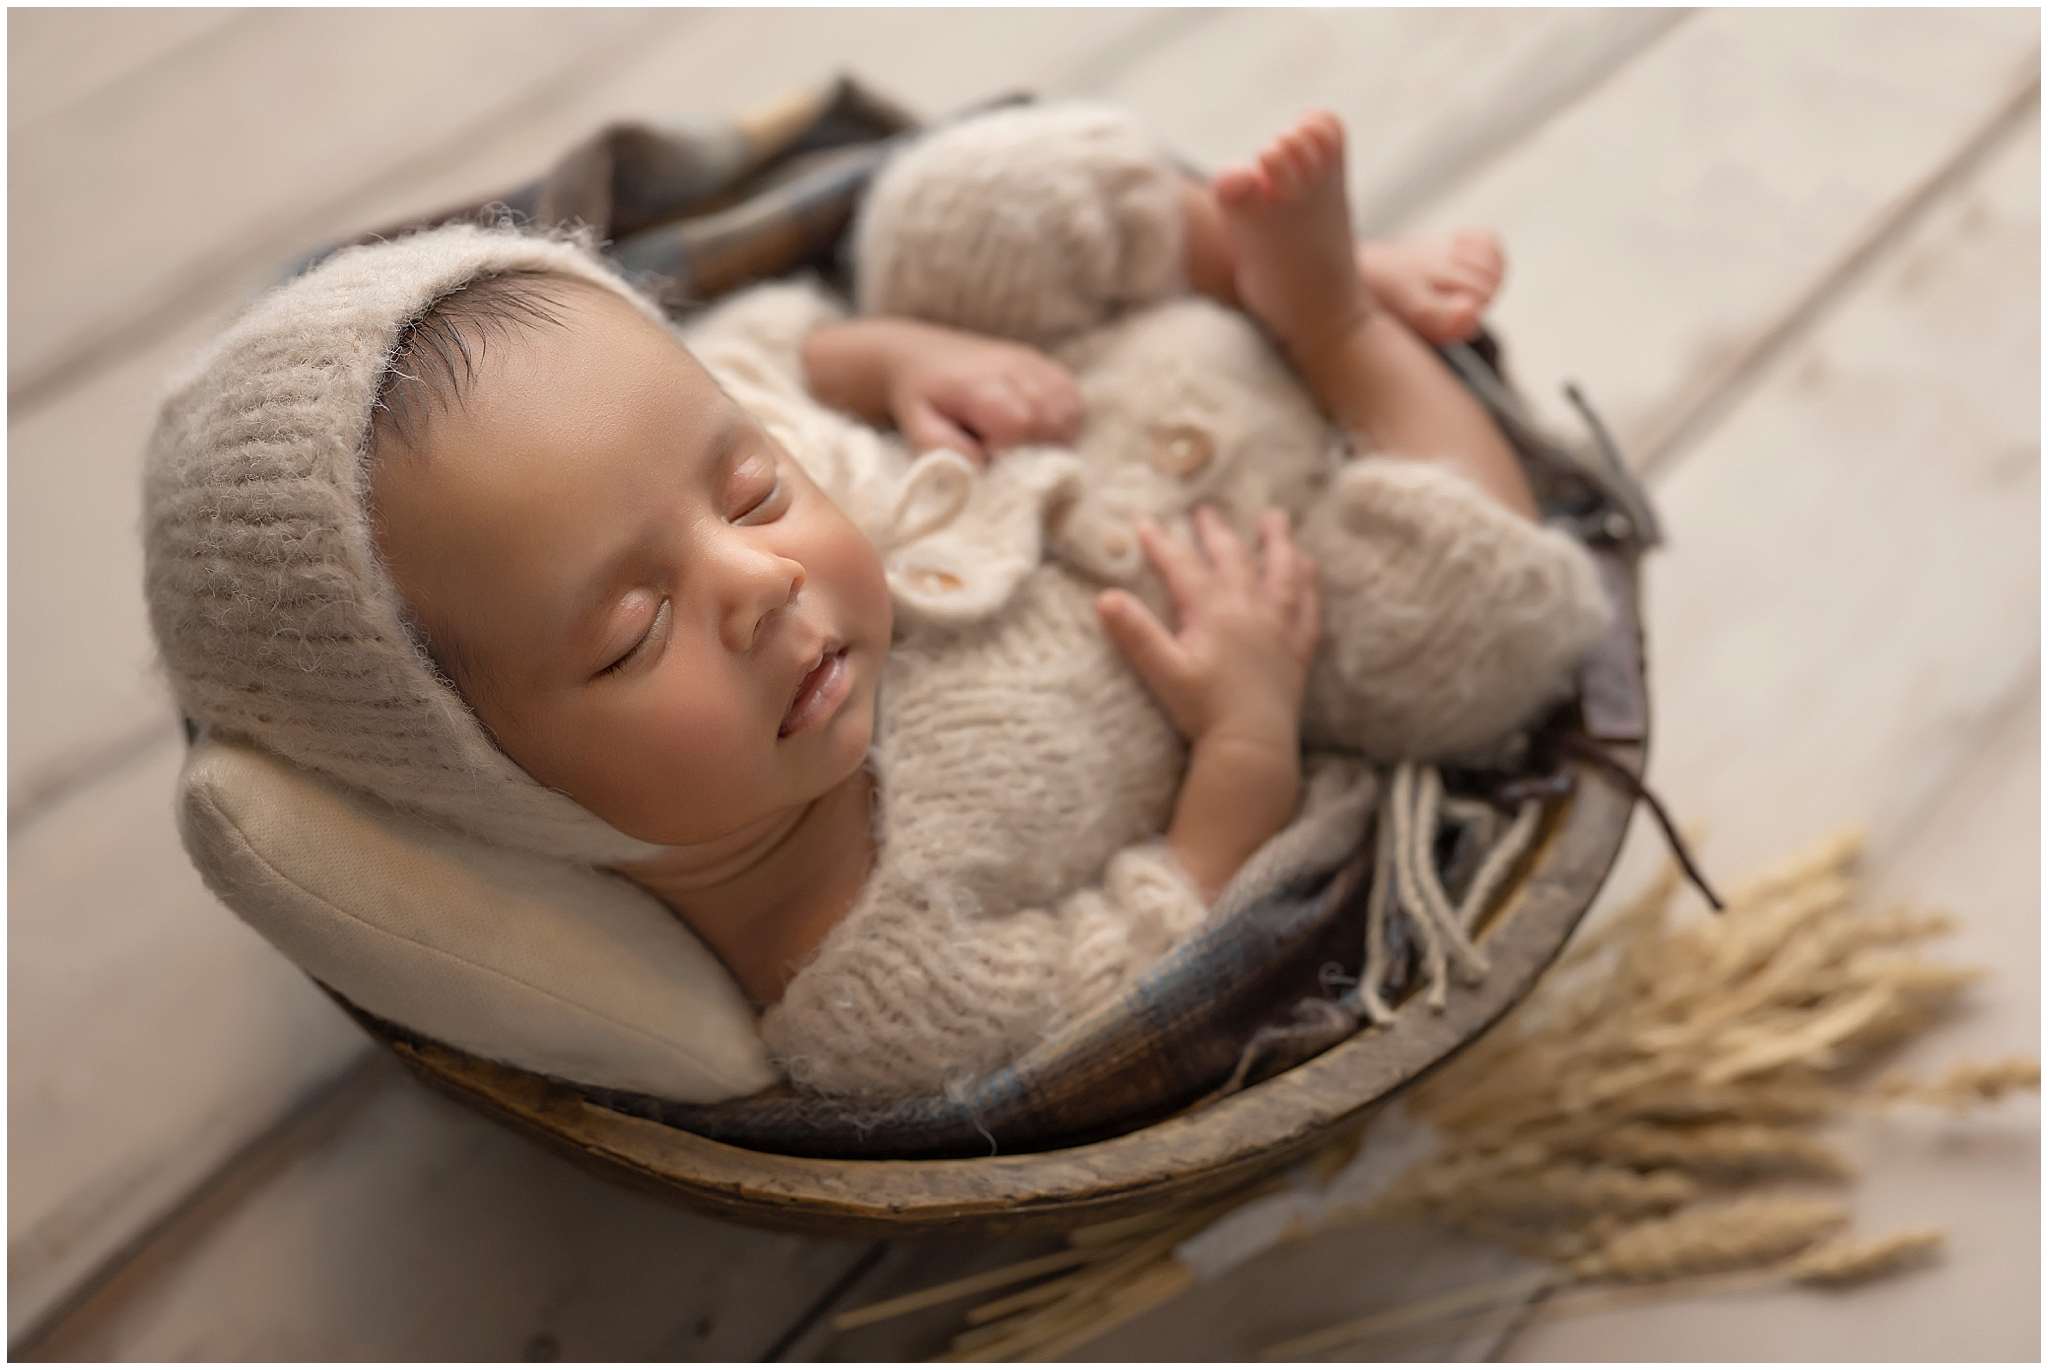 newborn baby sleeping in bowl with neutral colours  during newborn photography session at london ontario studio